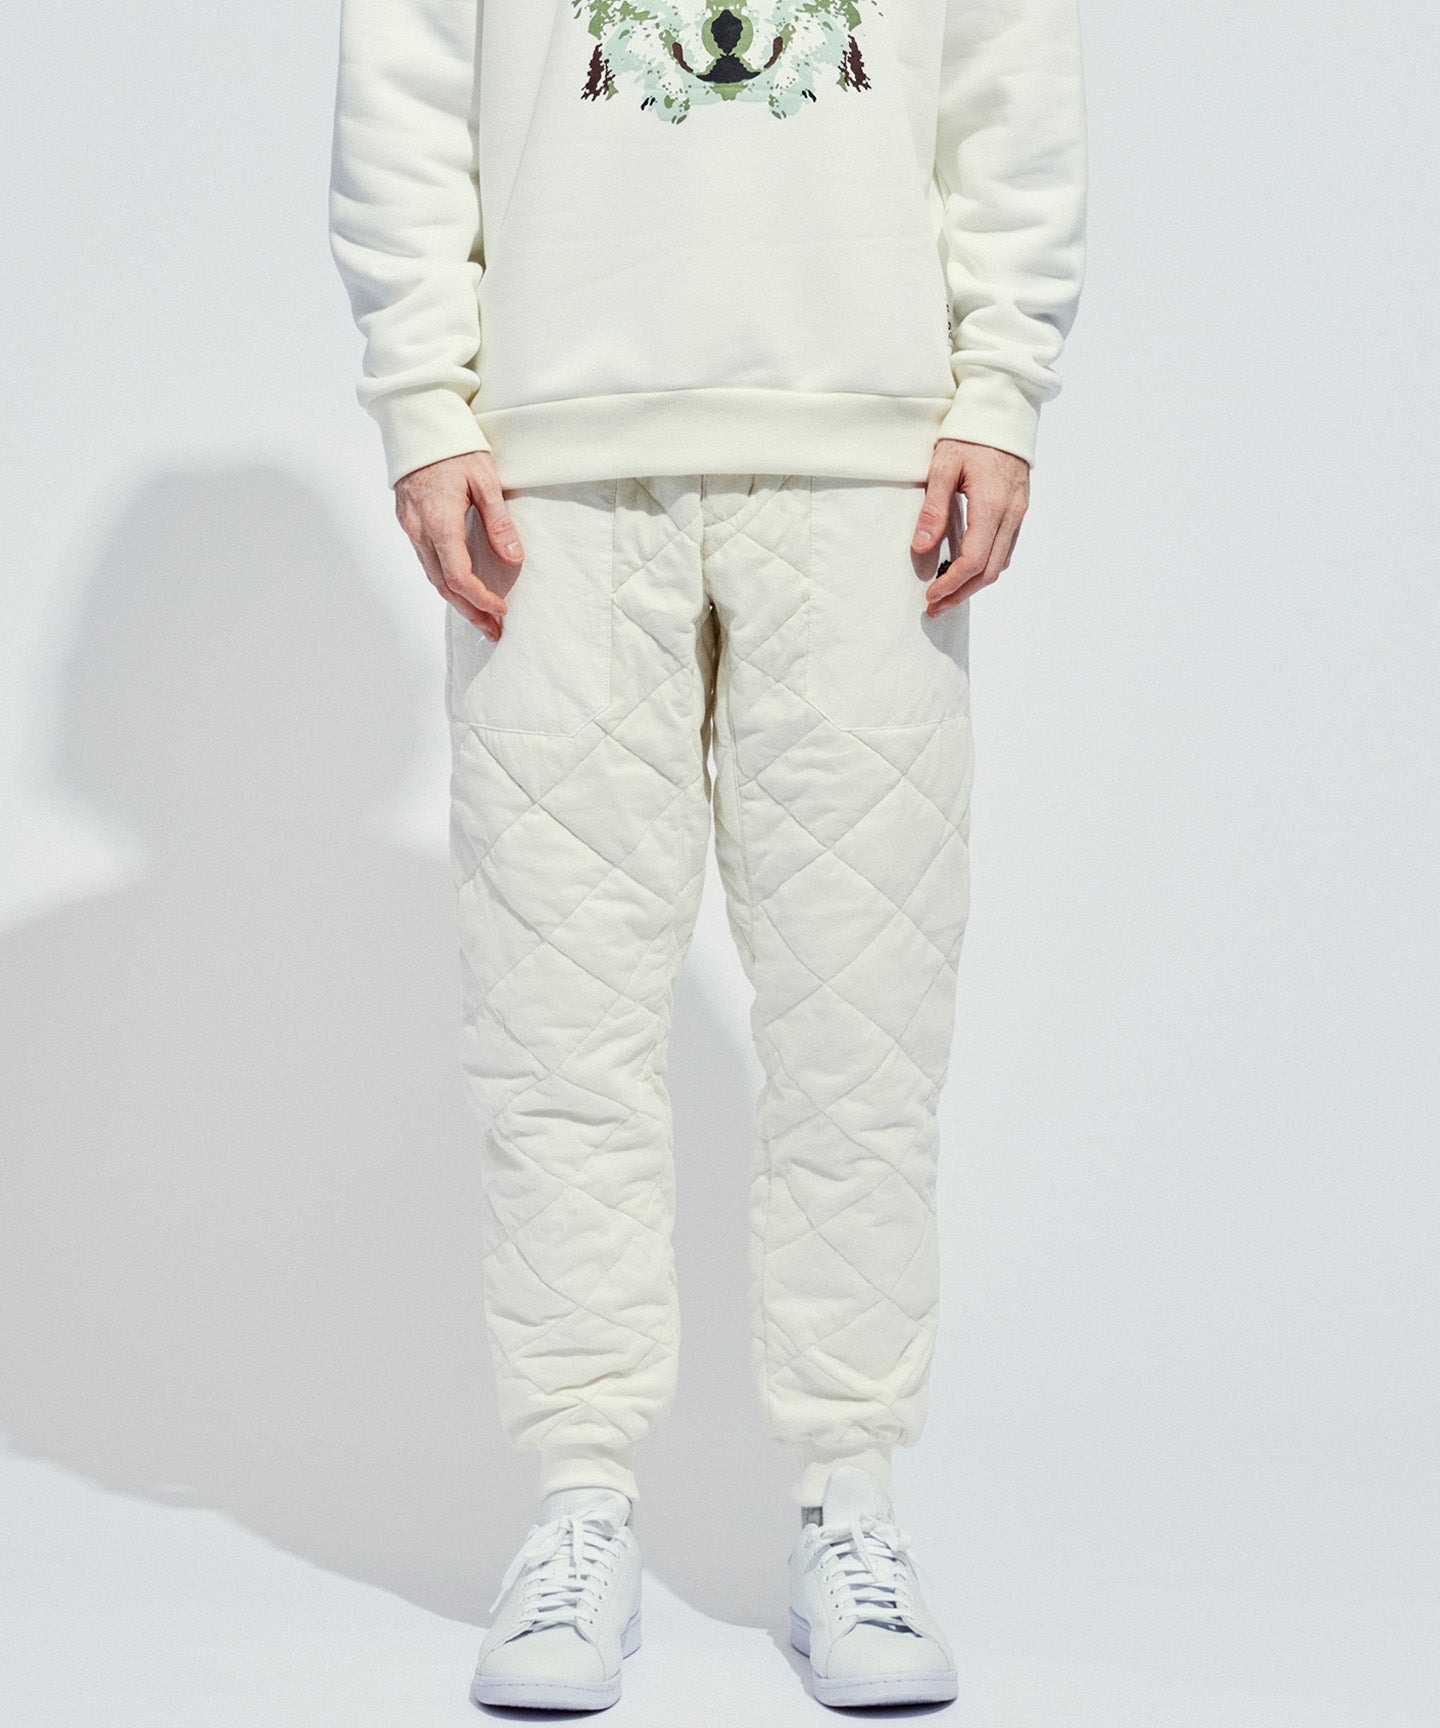 QUILTED JOGER PANTS | PW CIRCULUS : ピーダブリュサーキュラス -公式